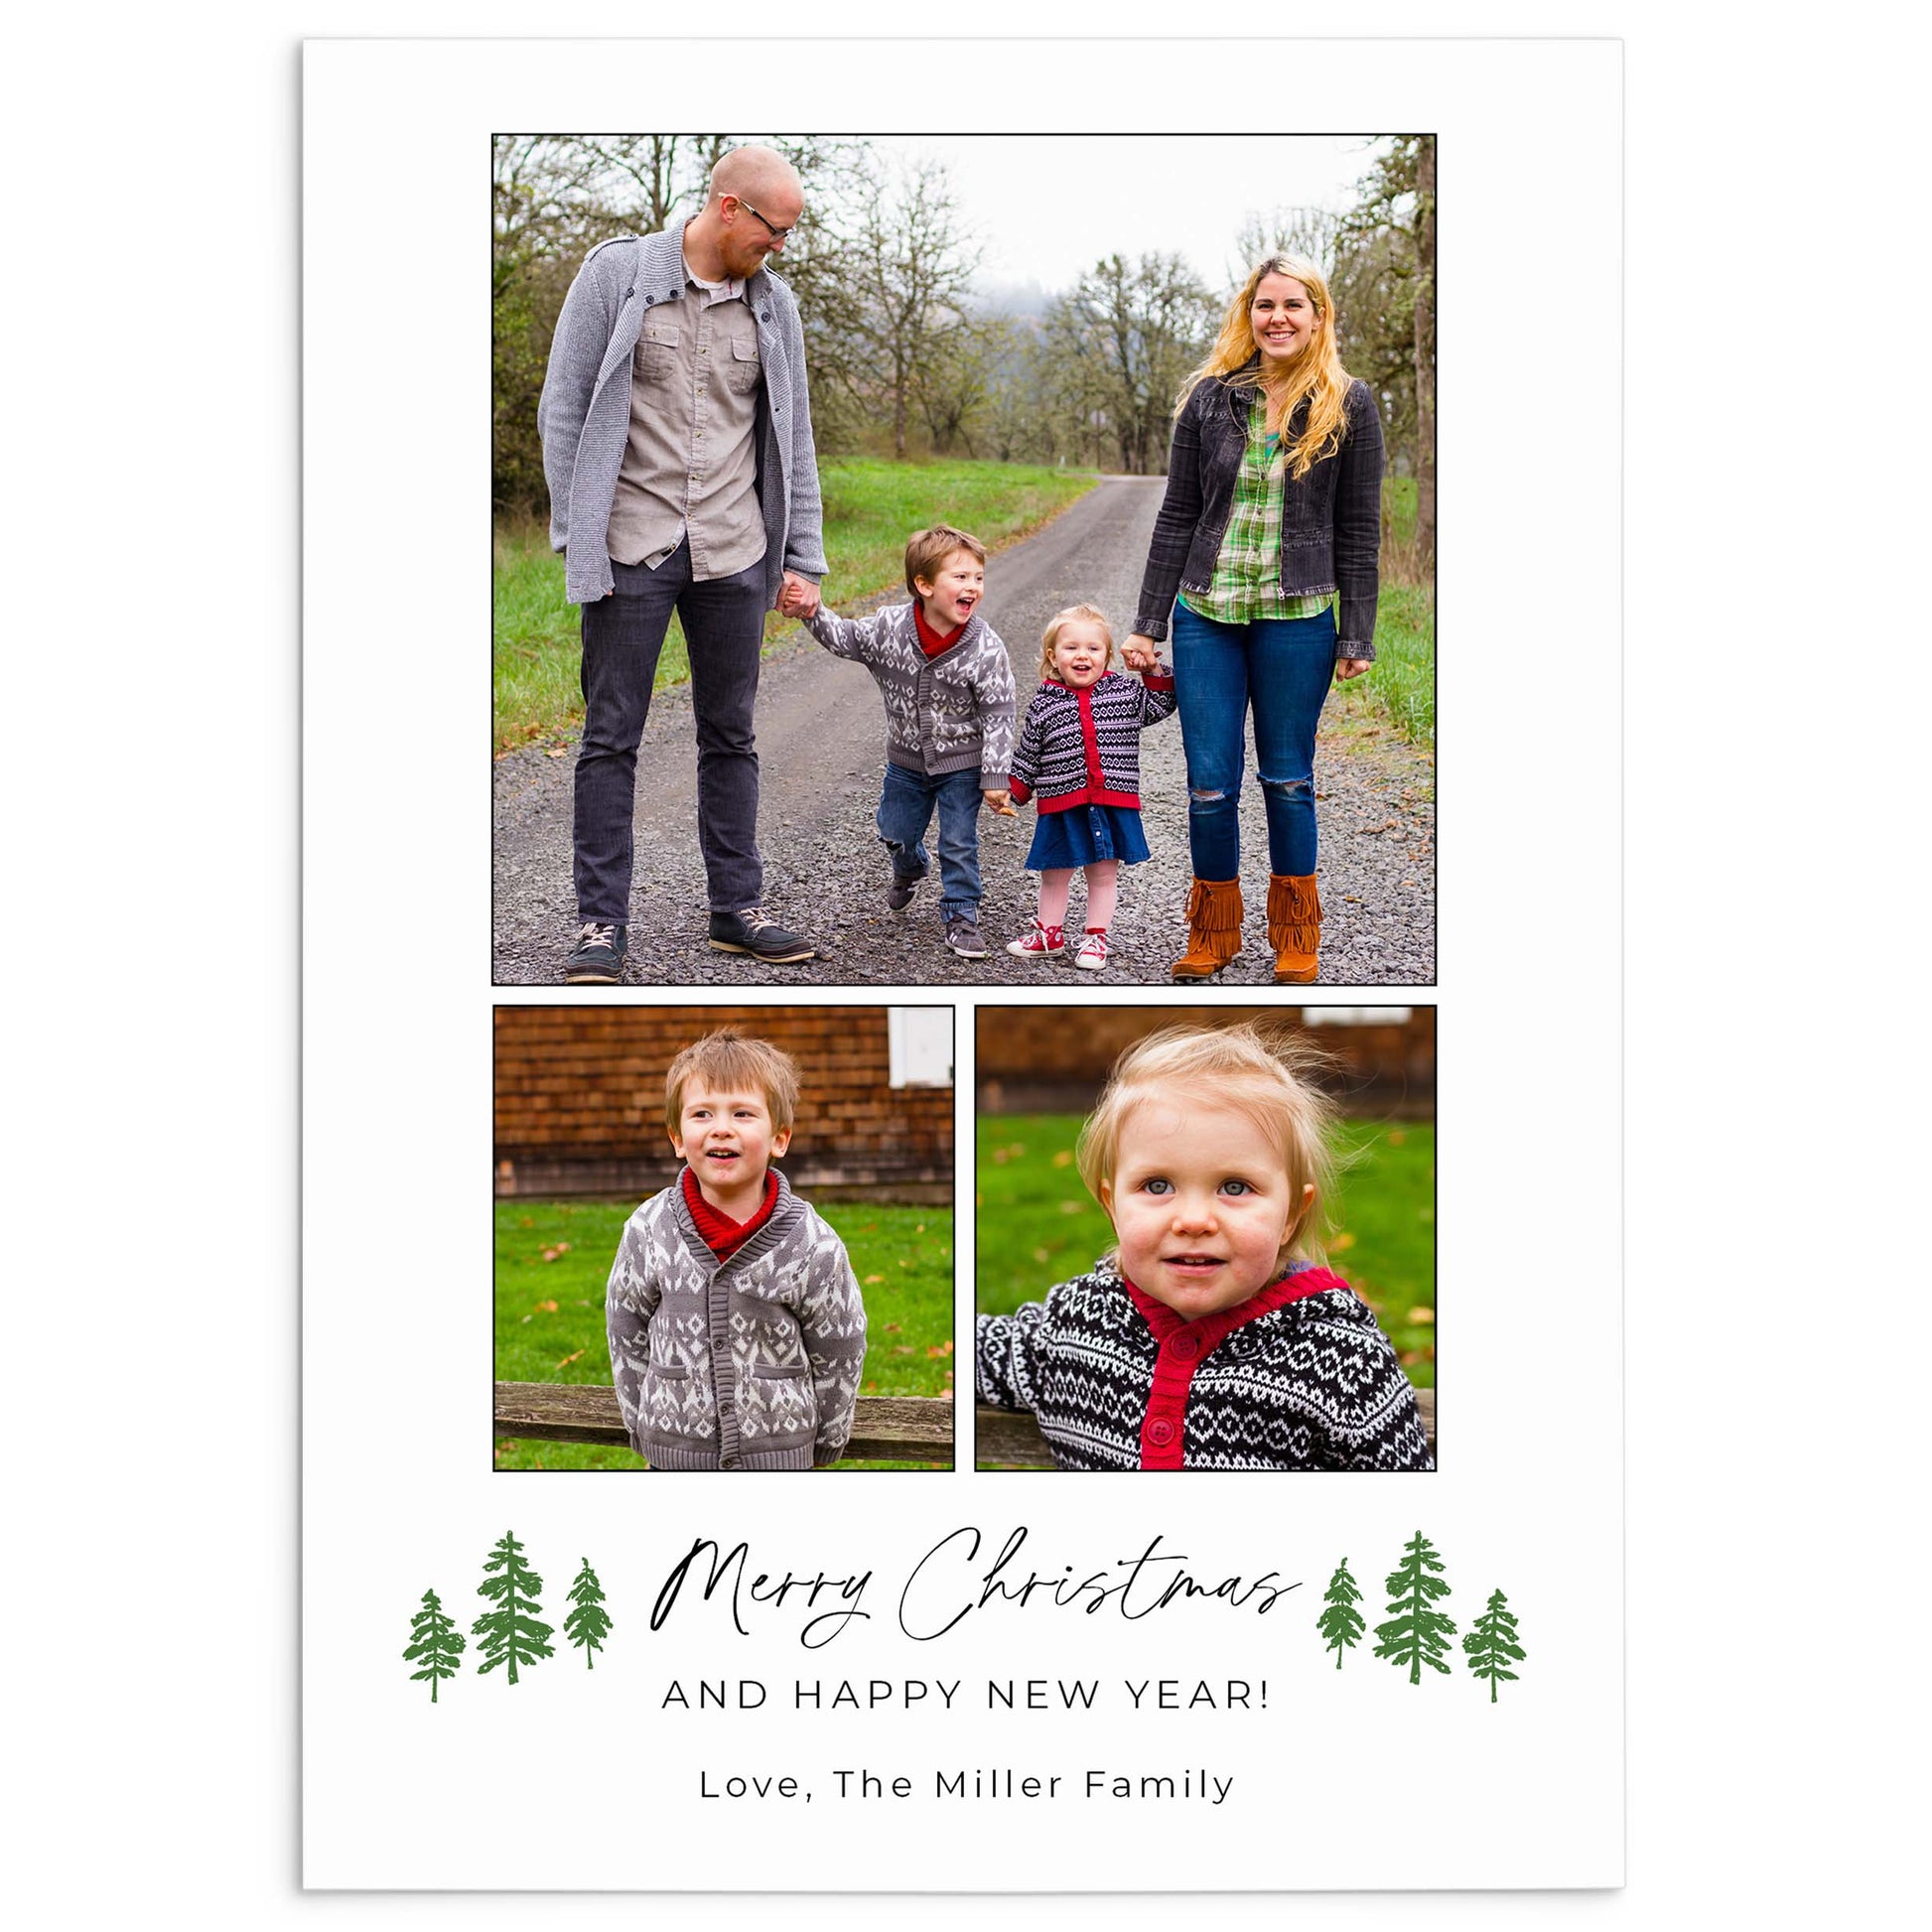 Merry Christmas and A Happy New Year! With Love, The Millers